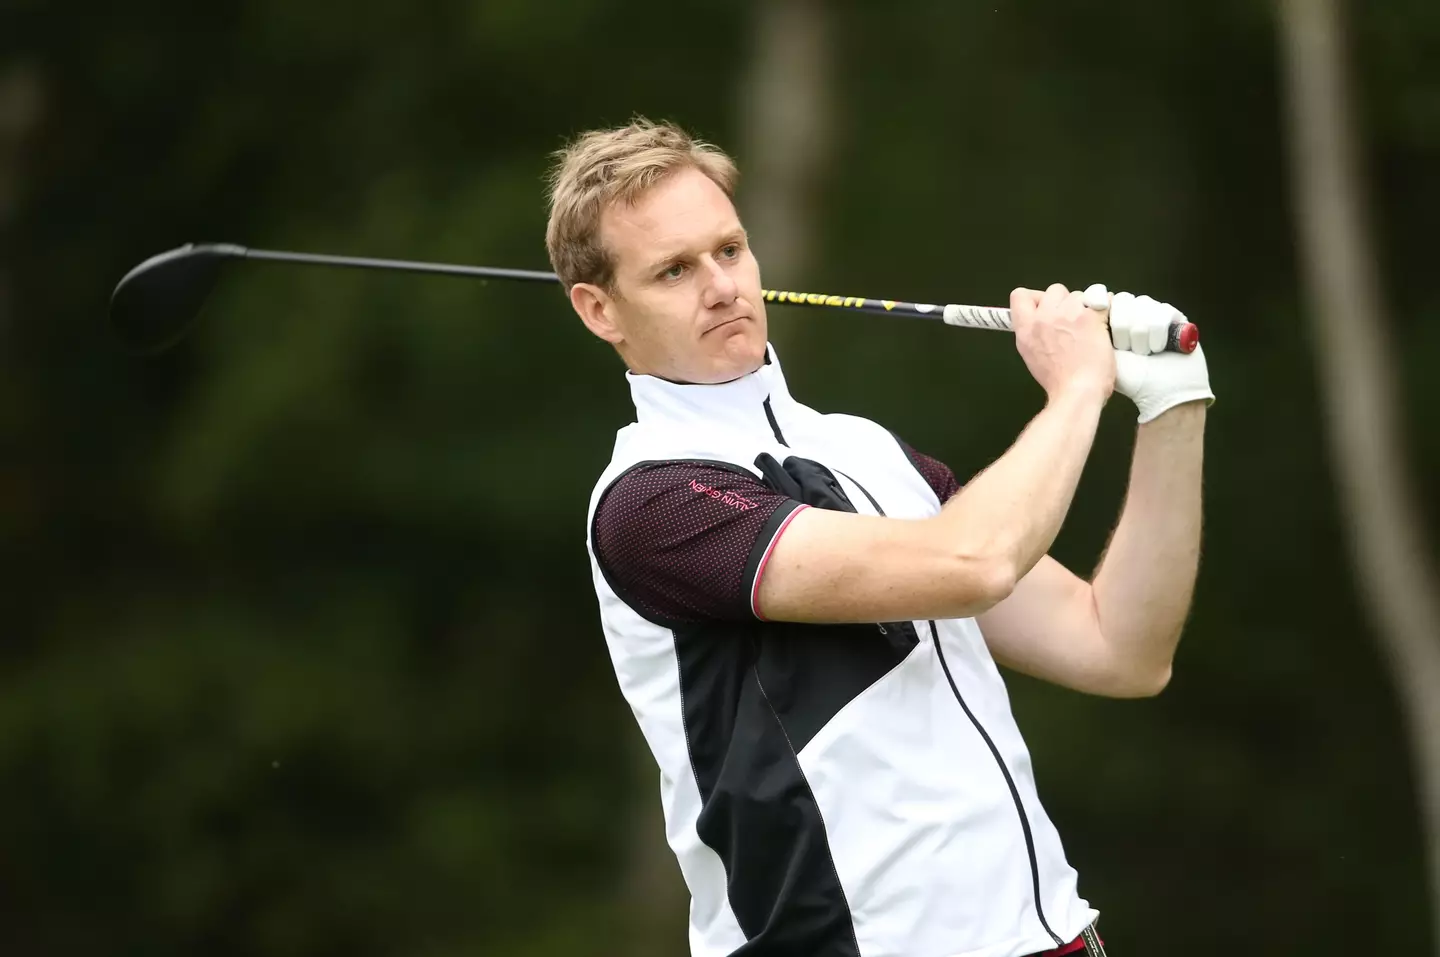 Dan Walker during the Pro Am ahead of the BMW PGA Championship at Wentworth Golf Club on May 23, 2018 in Surrey, England